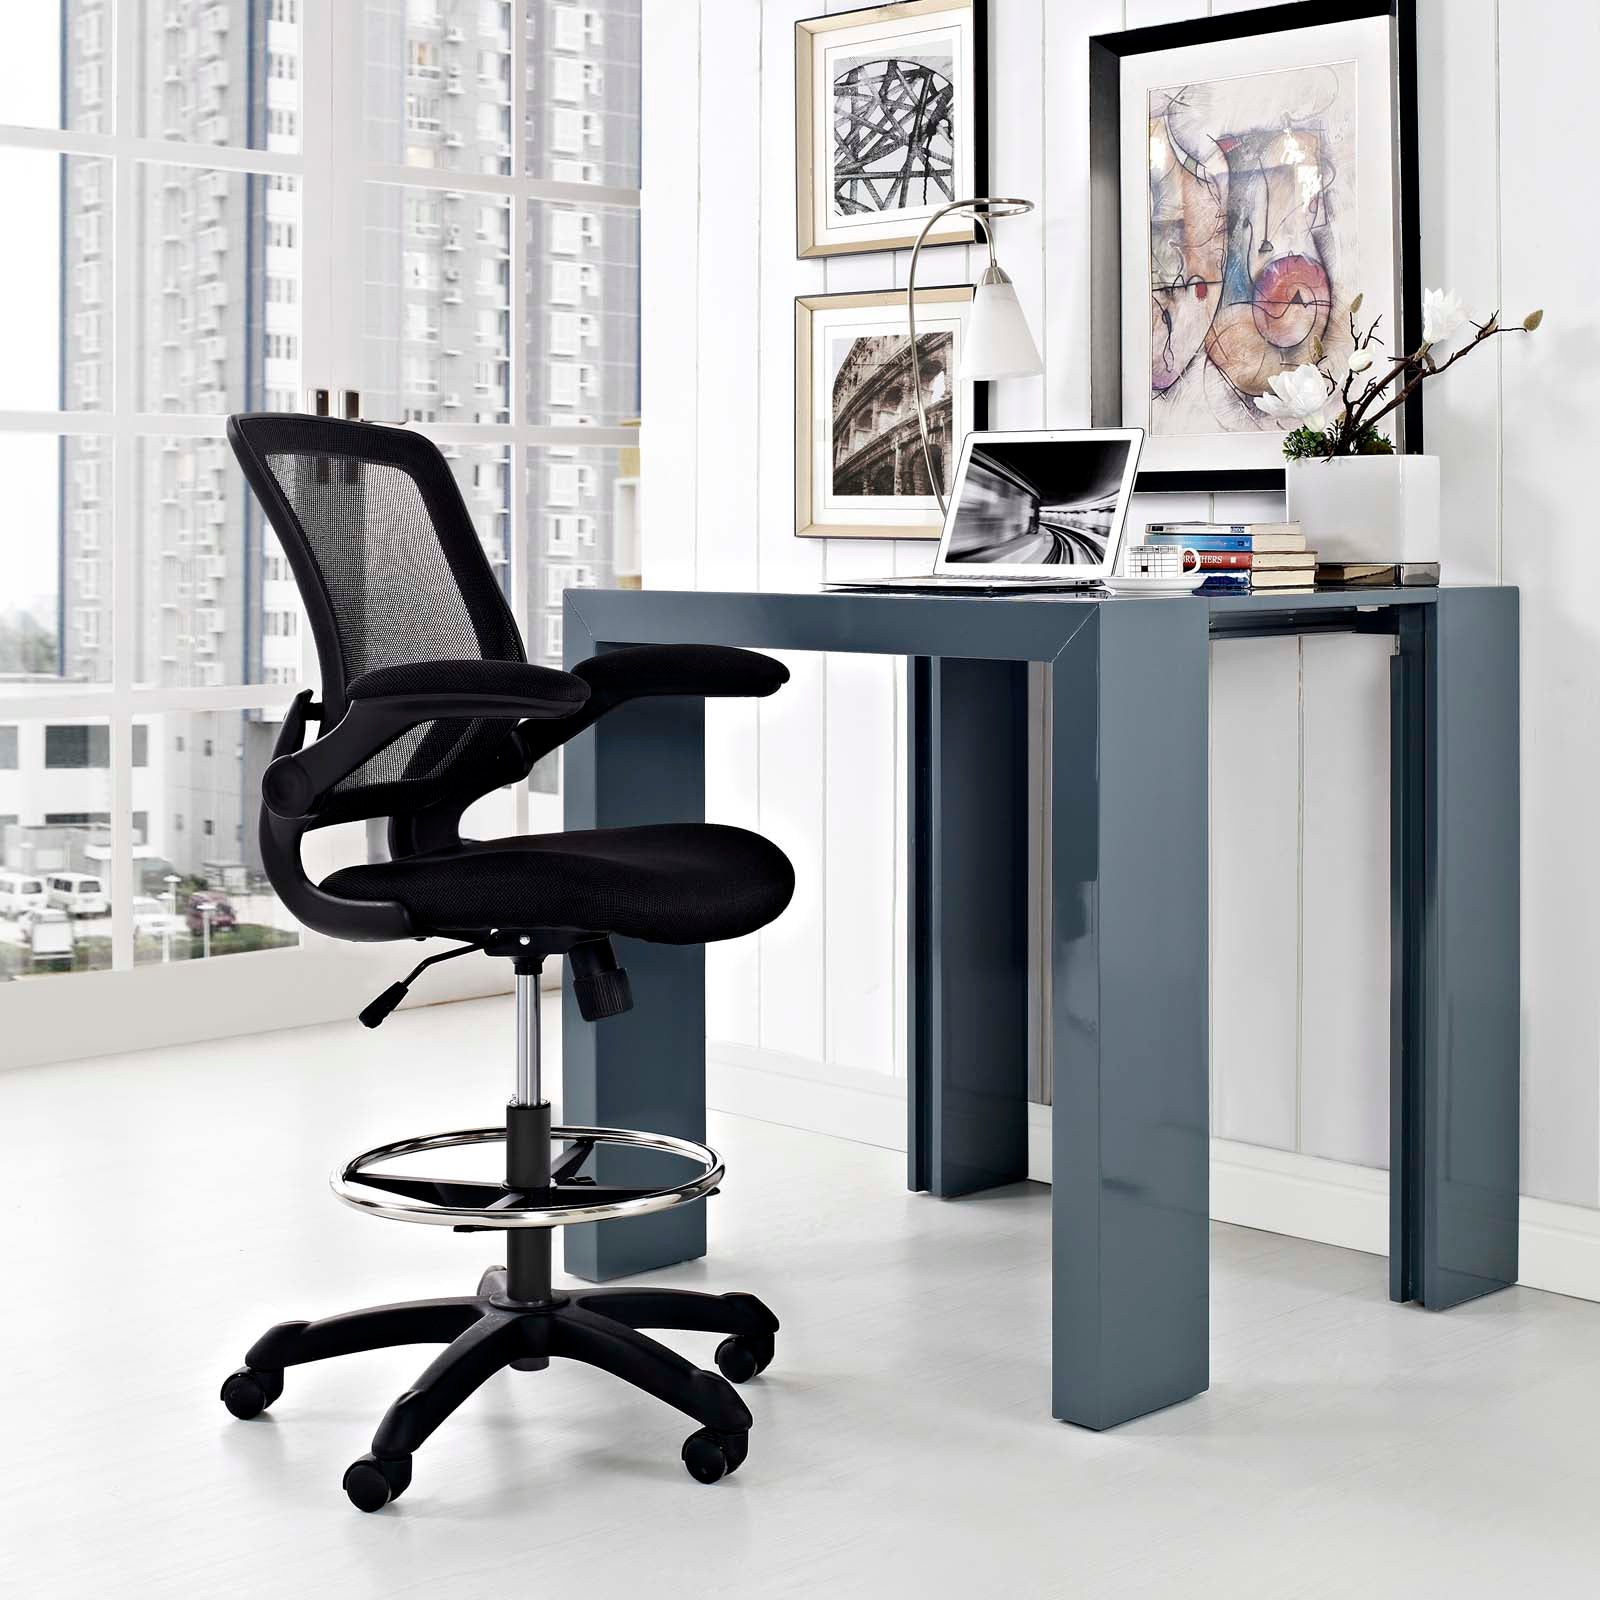 Stylish Drafting Chair for Office | BUILDMyplace